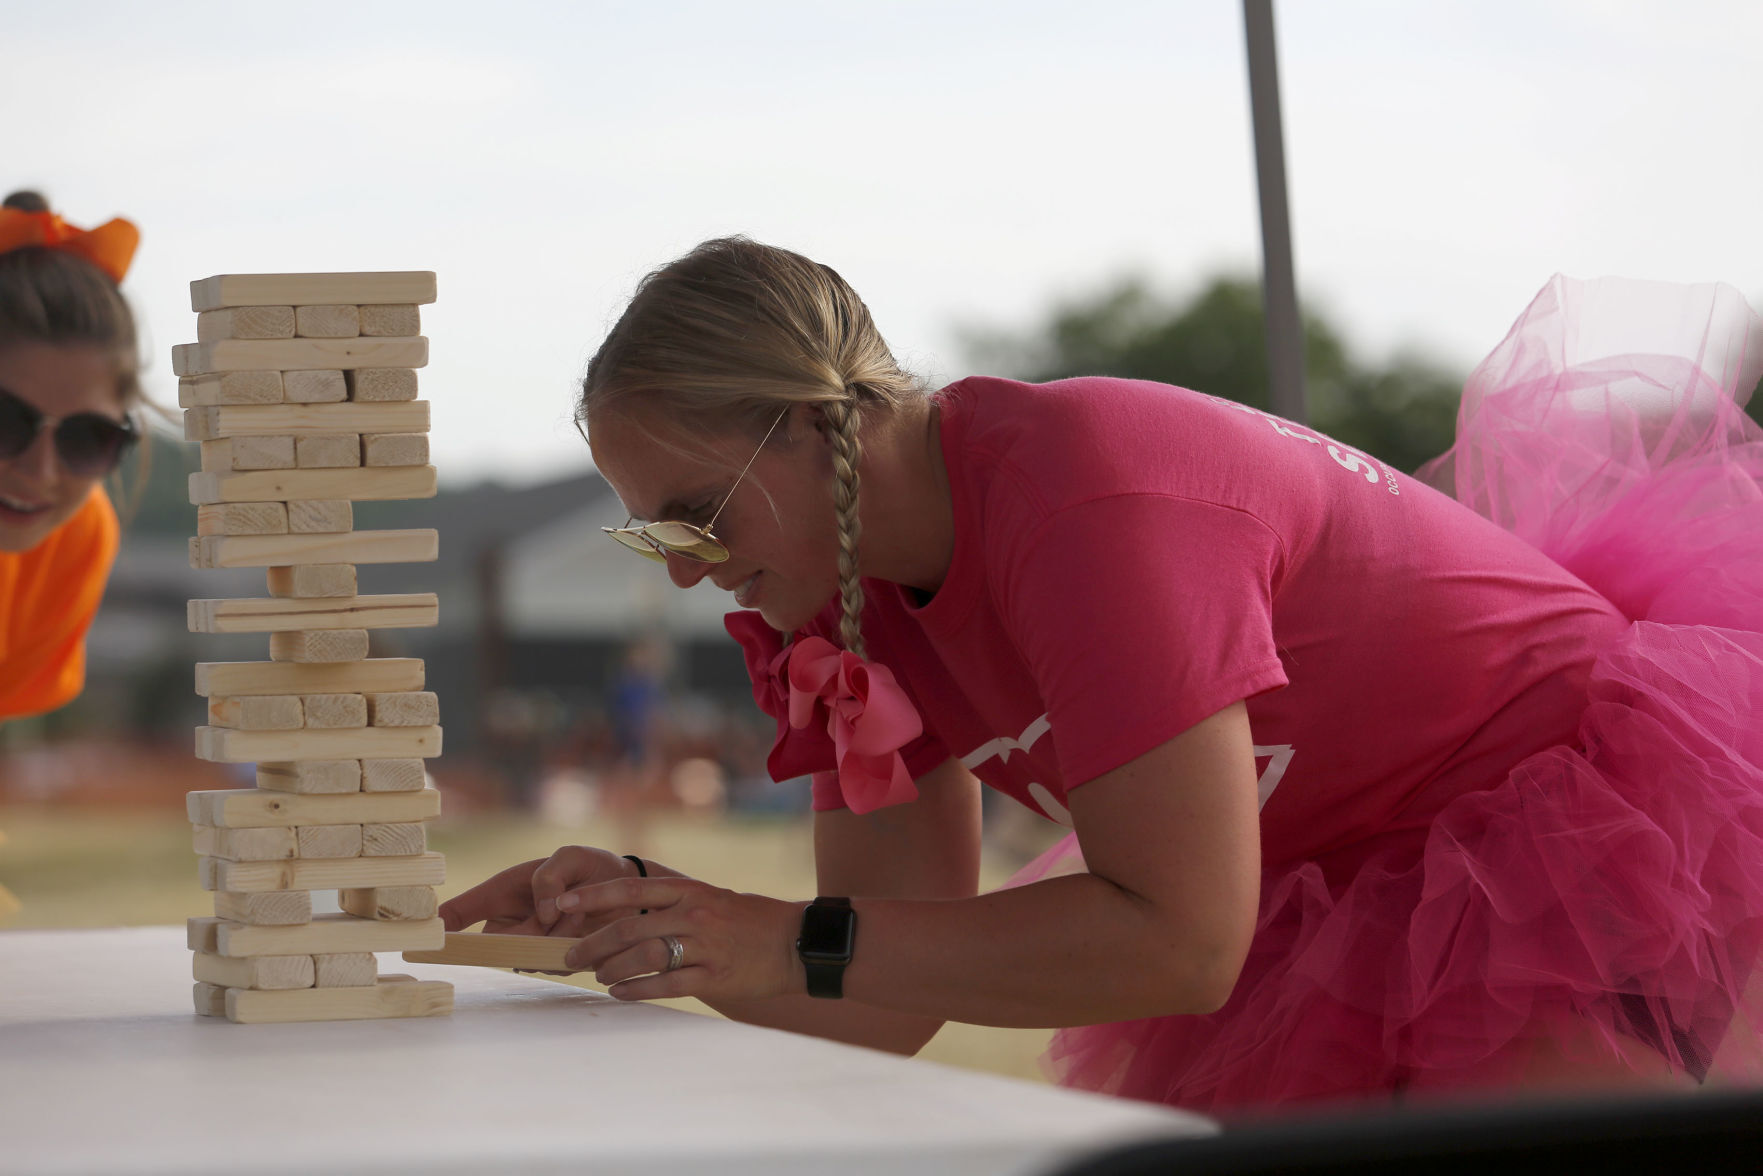 Michelle Sullivan with Unified Therapy Services does Jenga at the Area Residential Care Corporate and Community game night at the Port of Dubuque on Friday, June 11, 2021.    PHOTO CREDIT: Katie Goodale